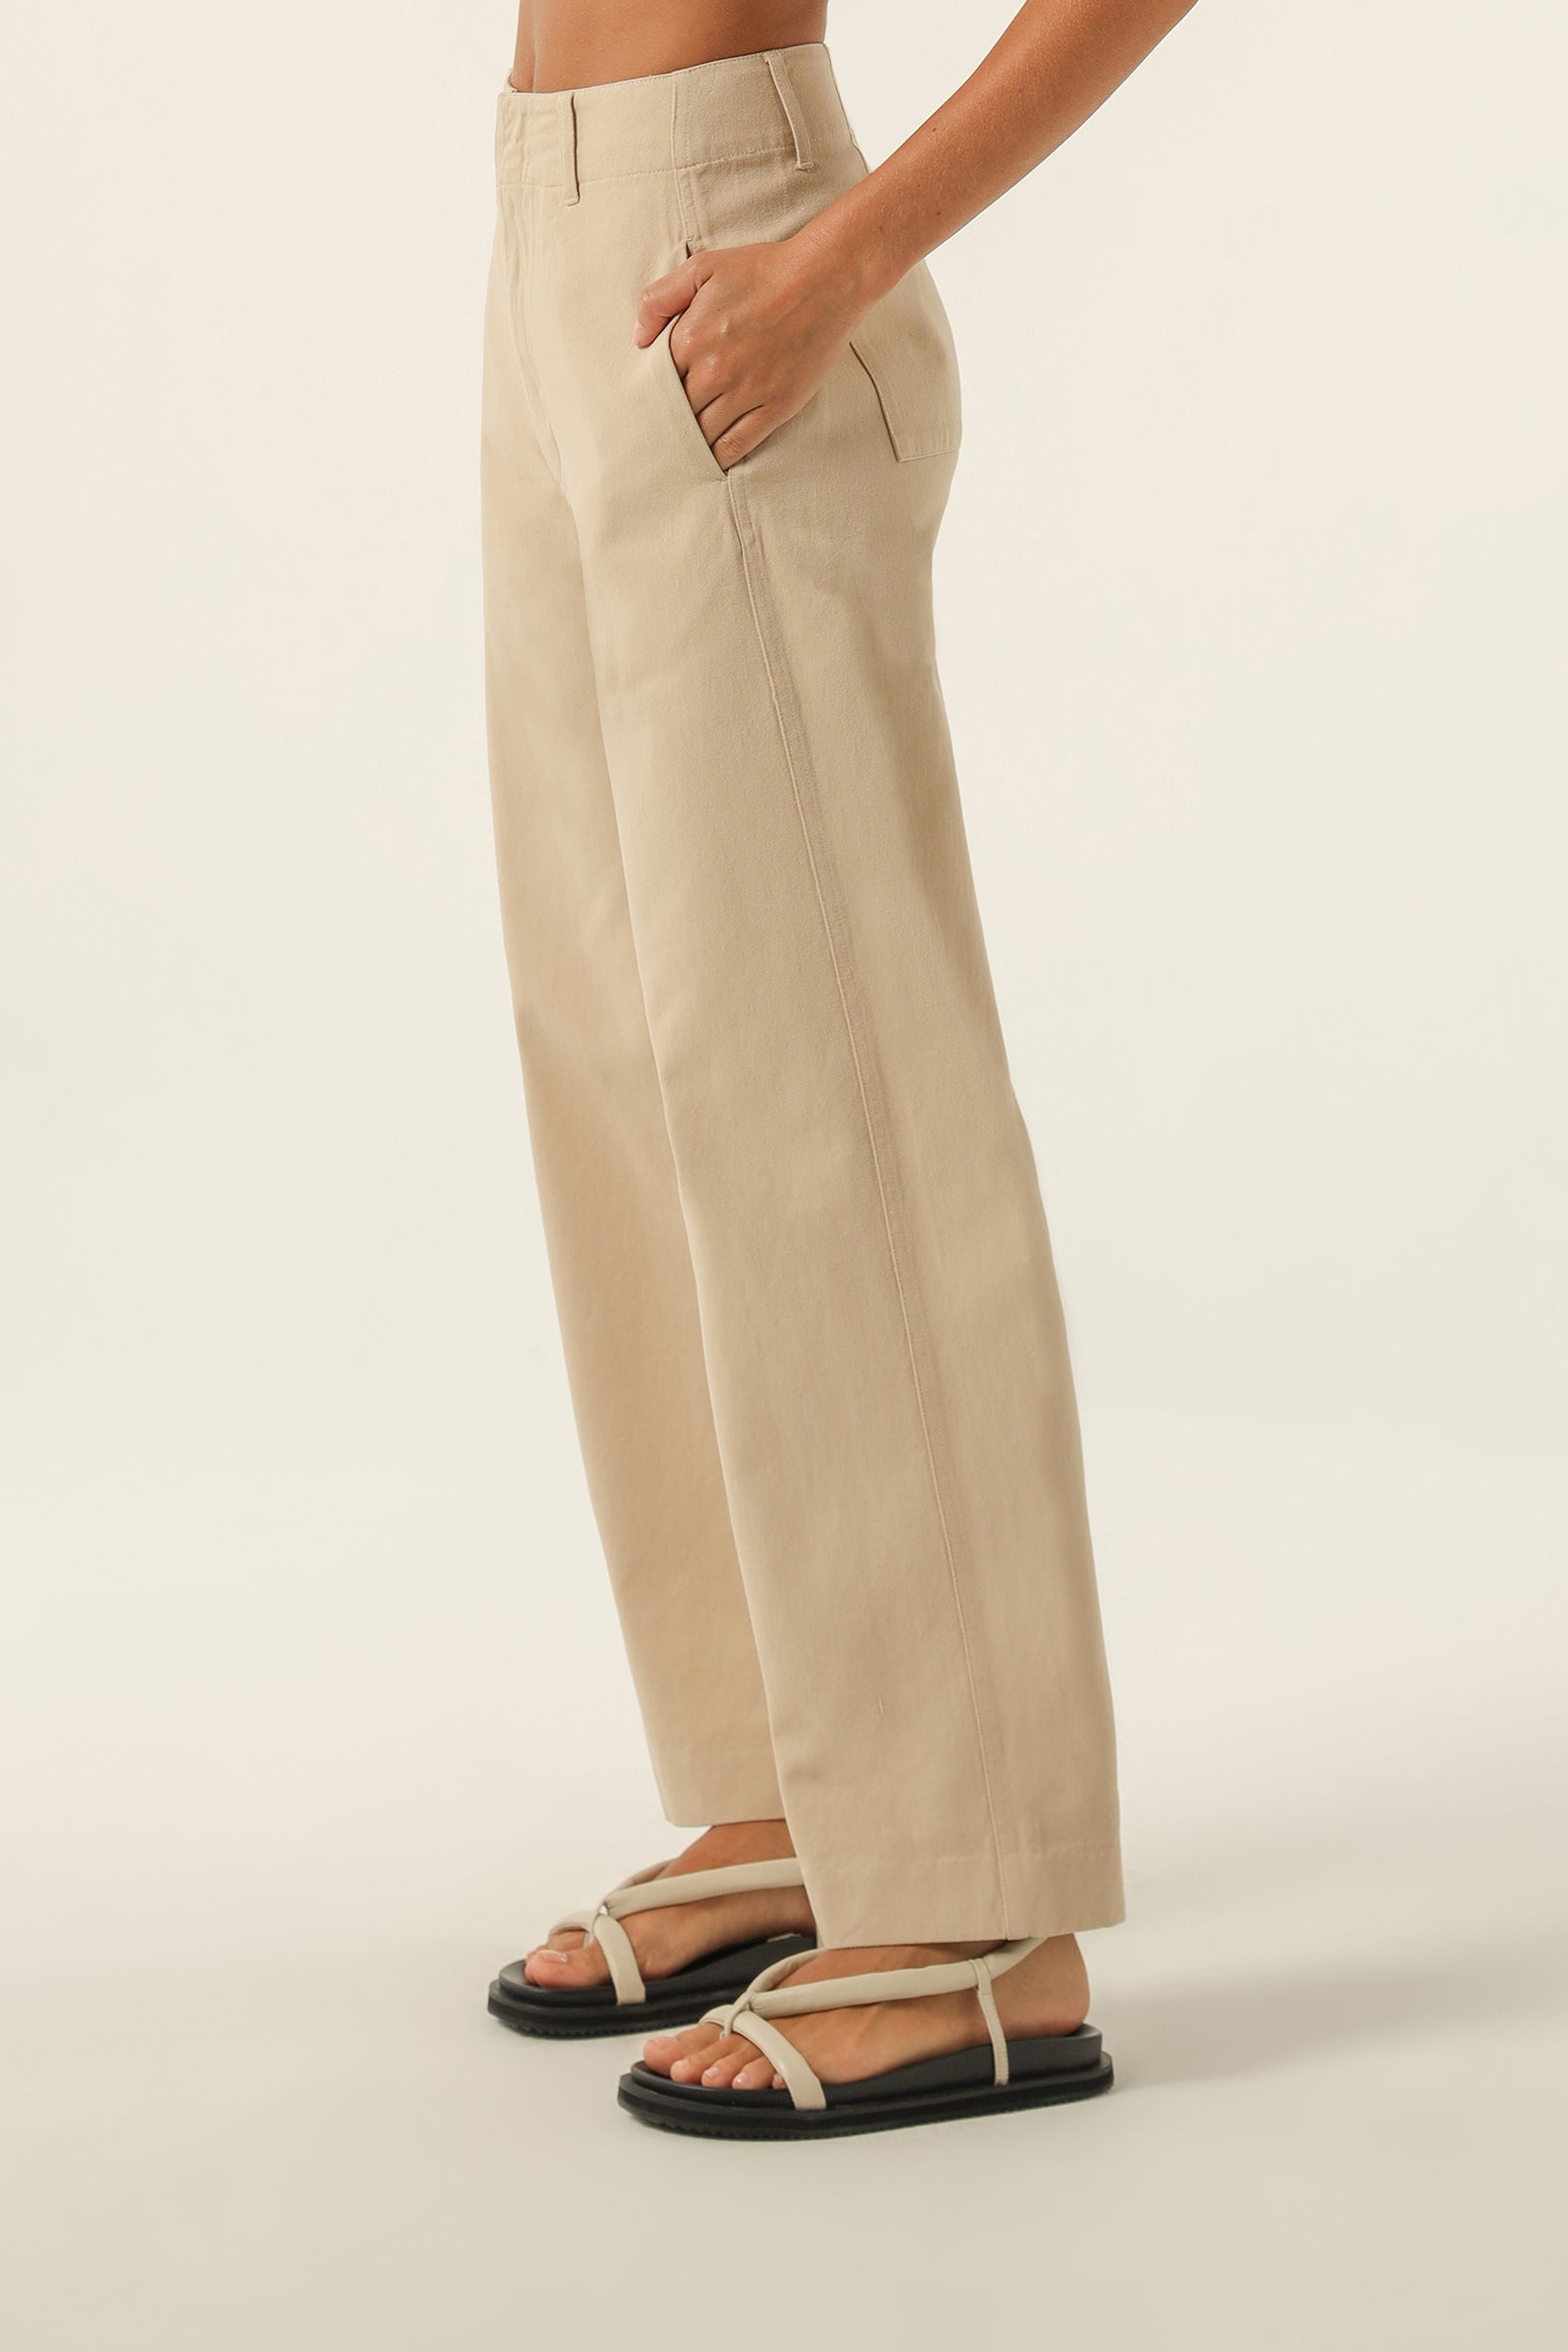 Nude Lucy Cooper Pant In a Yellow Sand Colour